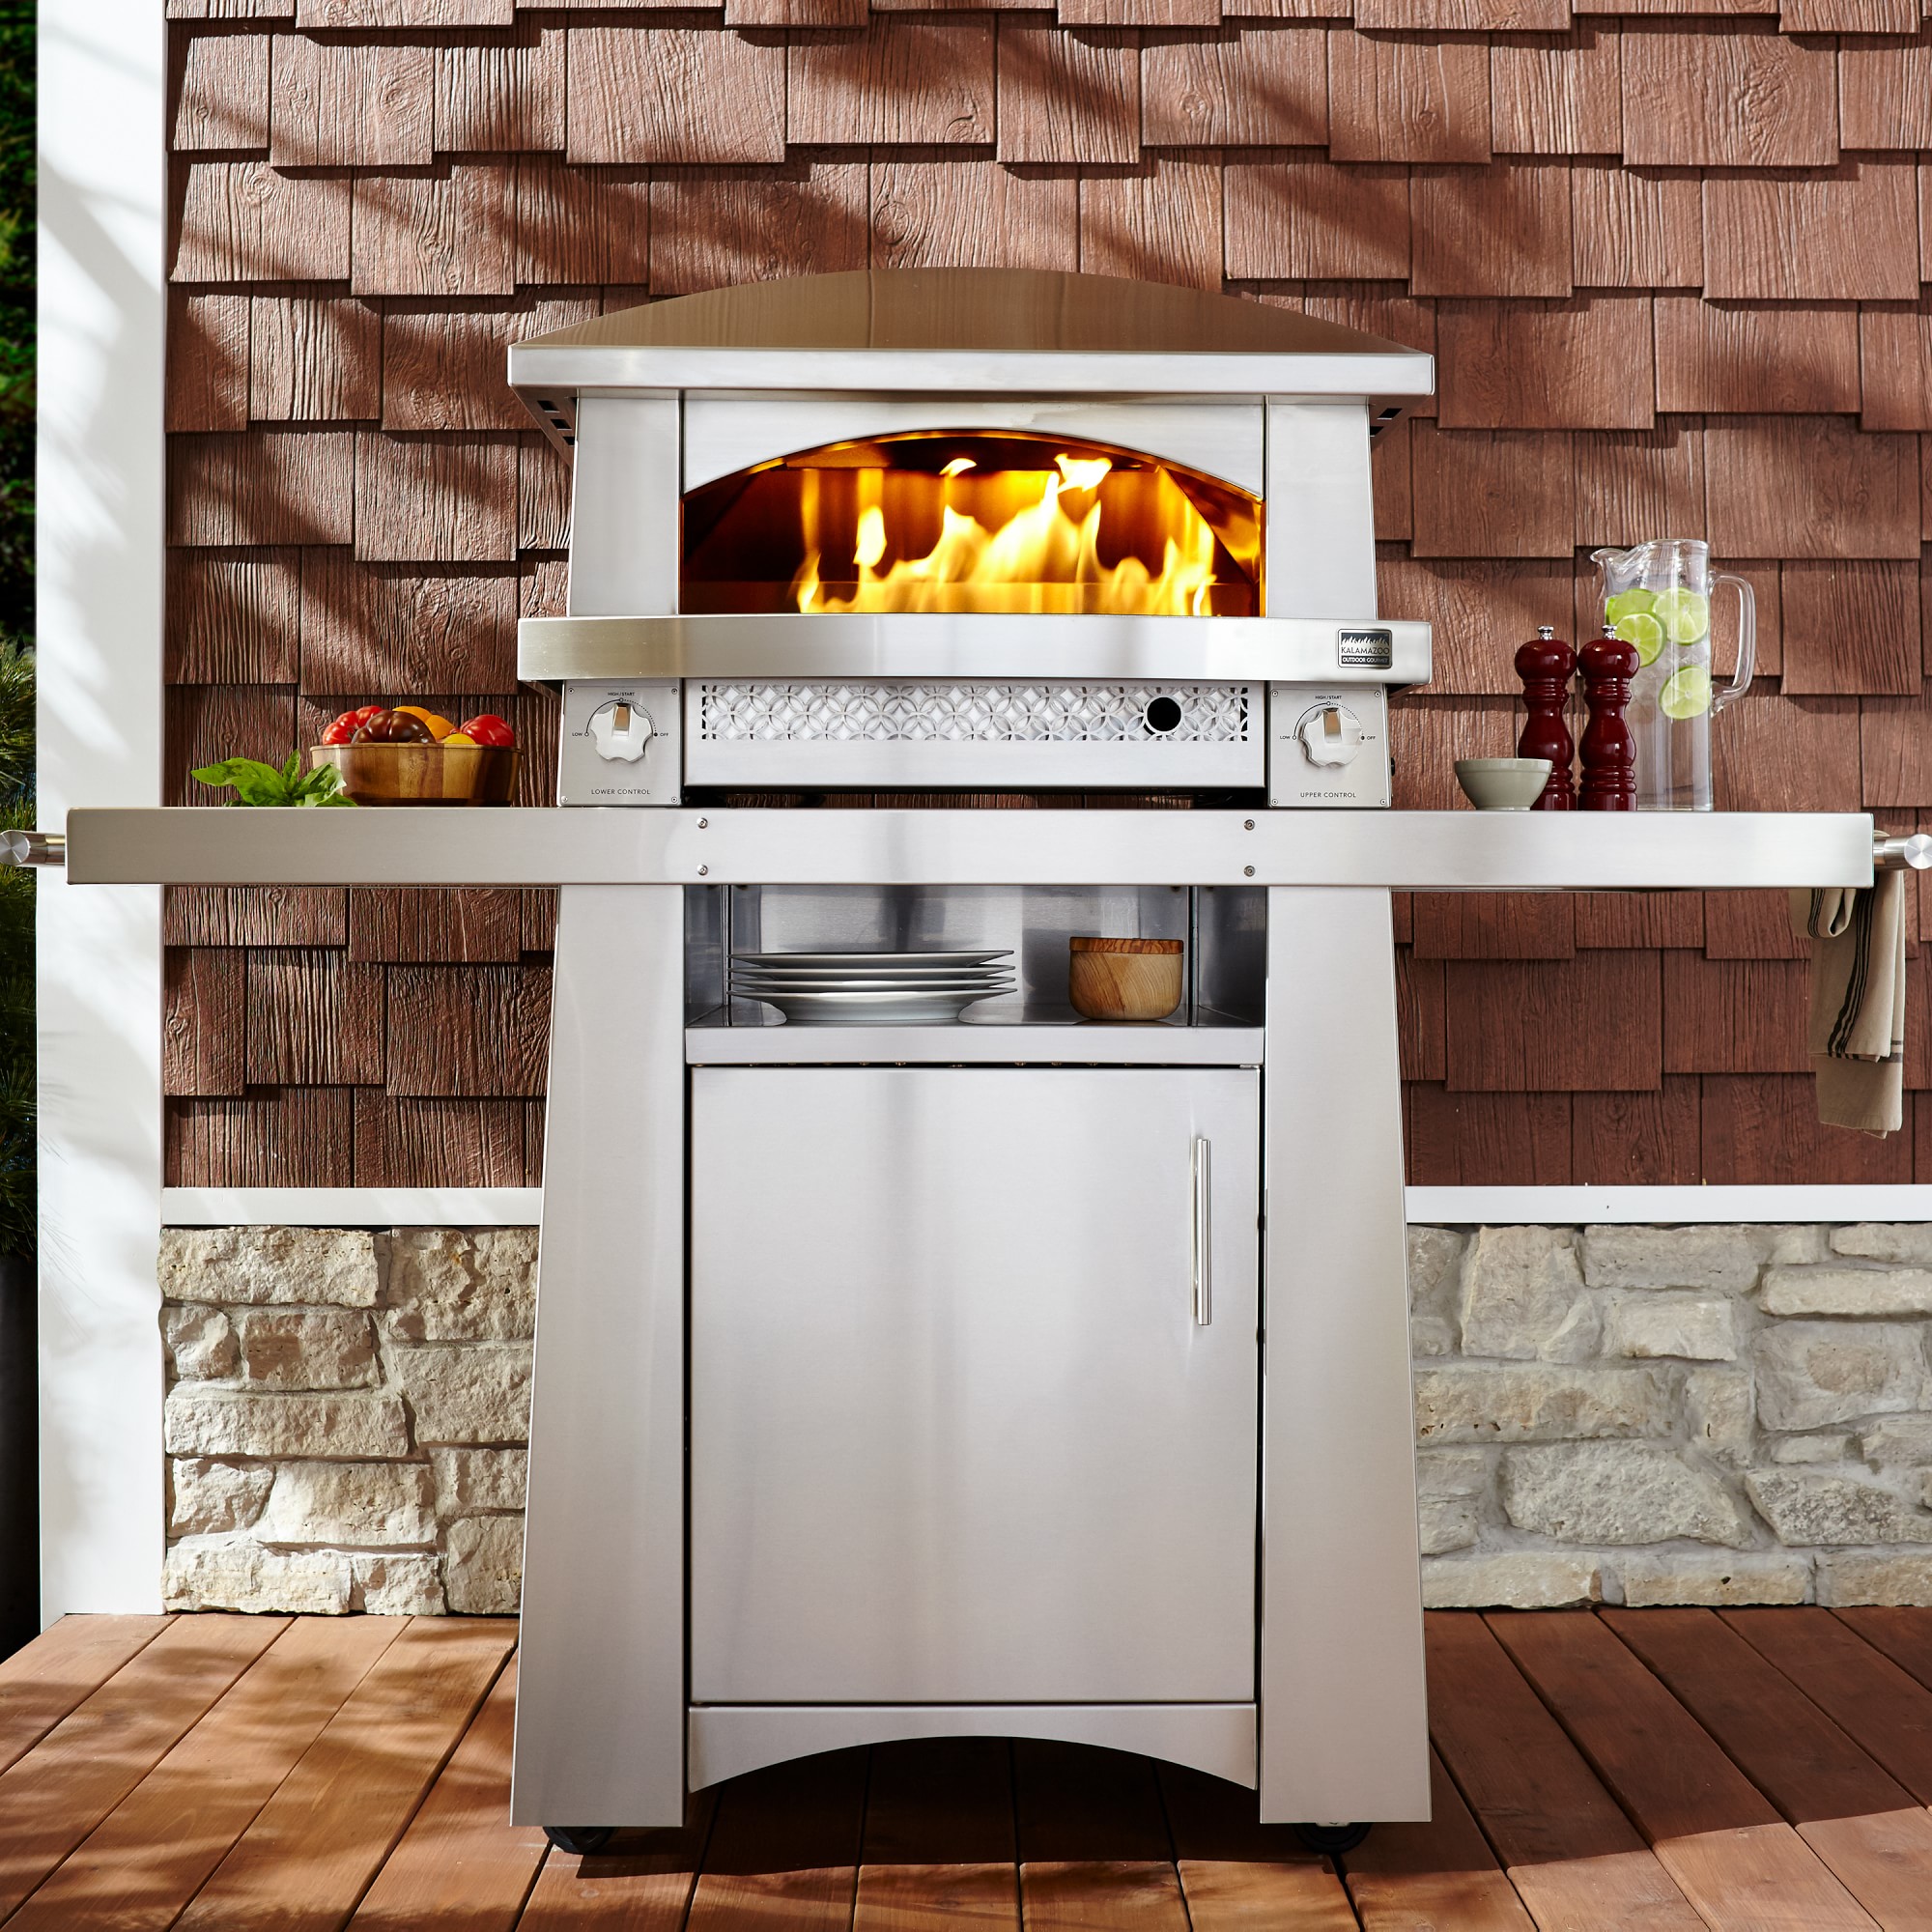 Kalamazoo Freestanding Artisan Fire Pizza Oven with Tools